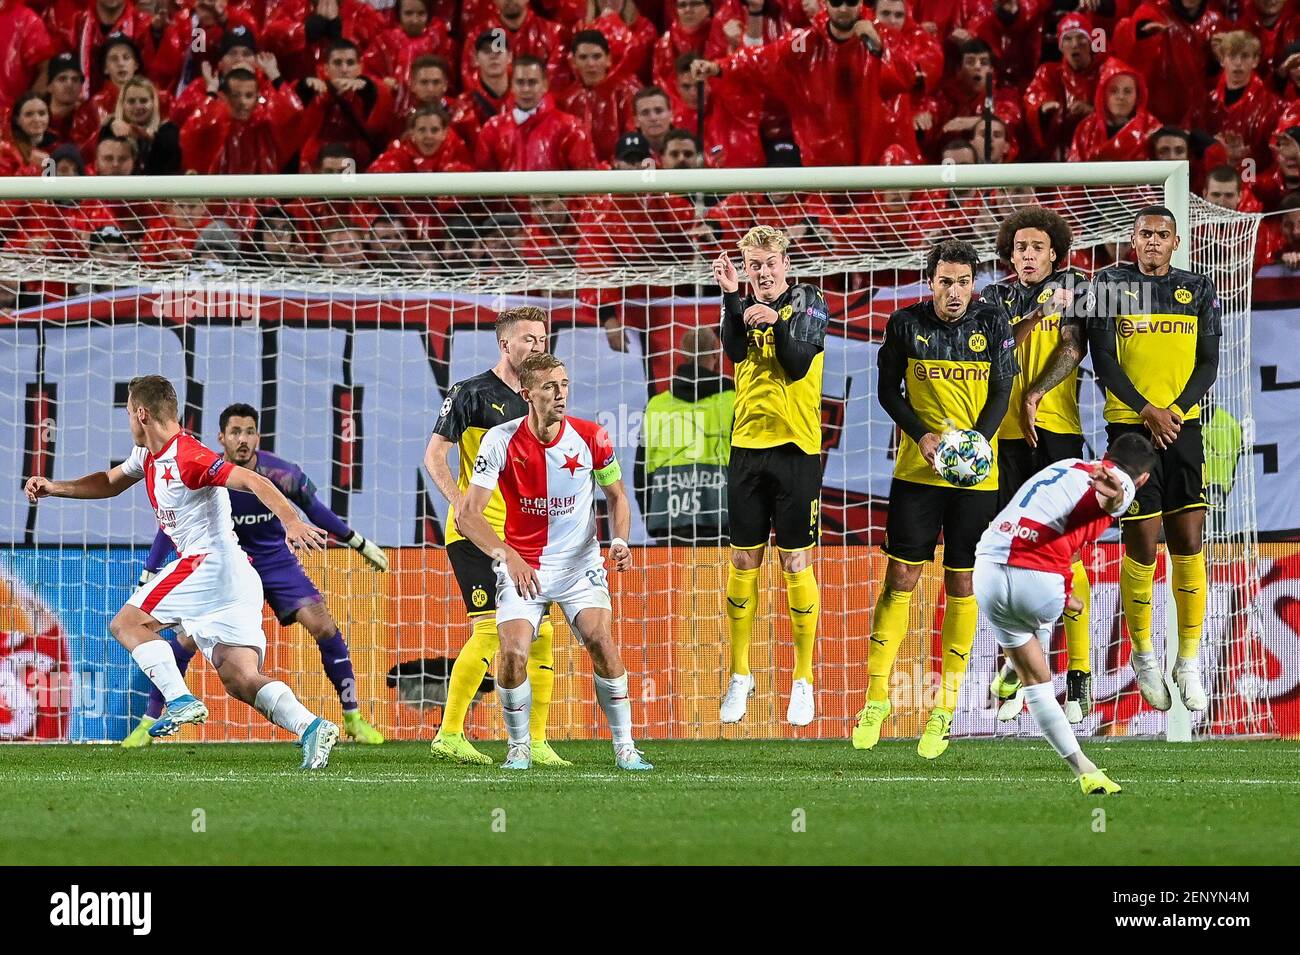 Nicolae Stanciu from Slavia Prague in action during the UEFA Champions  League (Group F) match between Slavia Prague and Borussia Dortmund in Prague.  (Final score; Slavia Prague 0:2 Borussia Dortmund) (Photo by